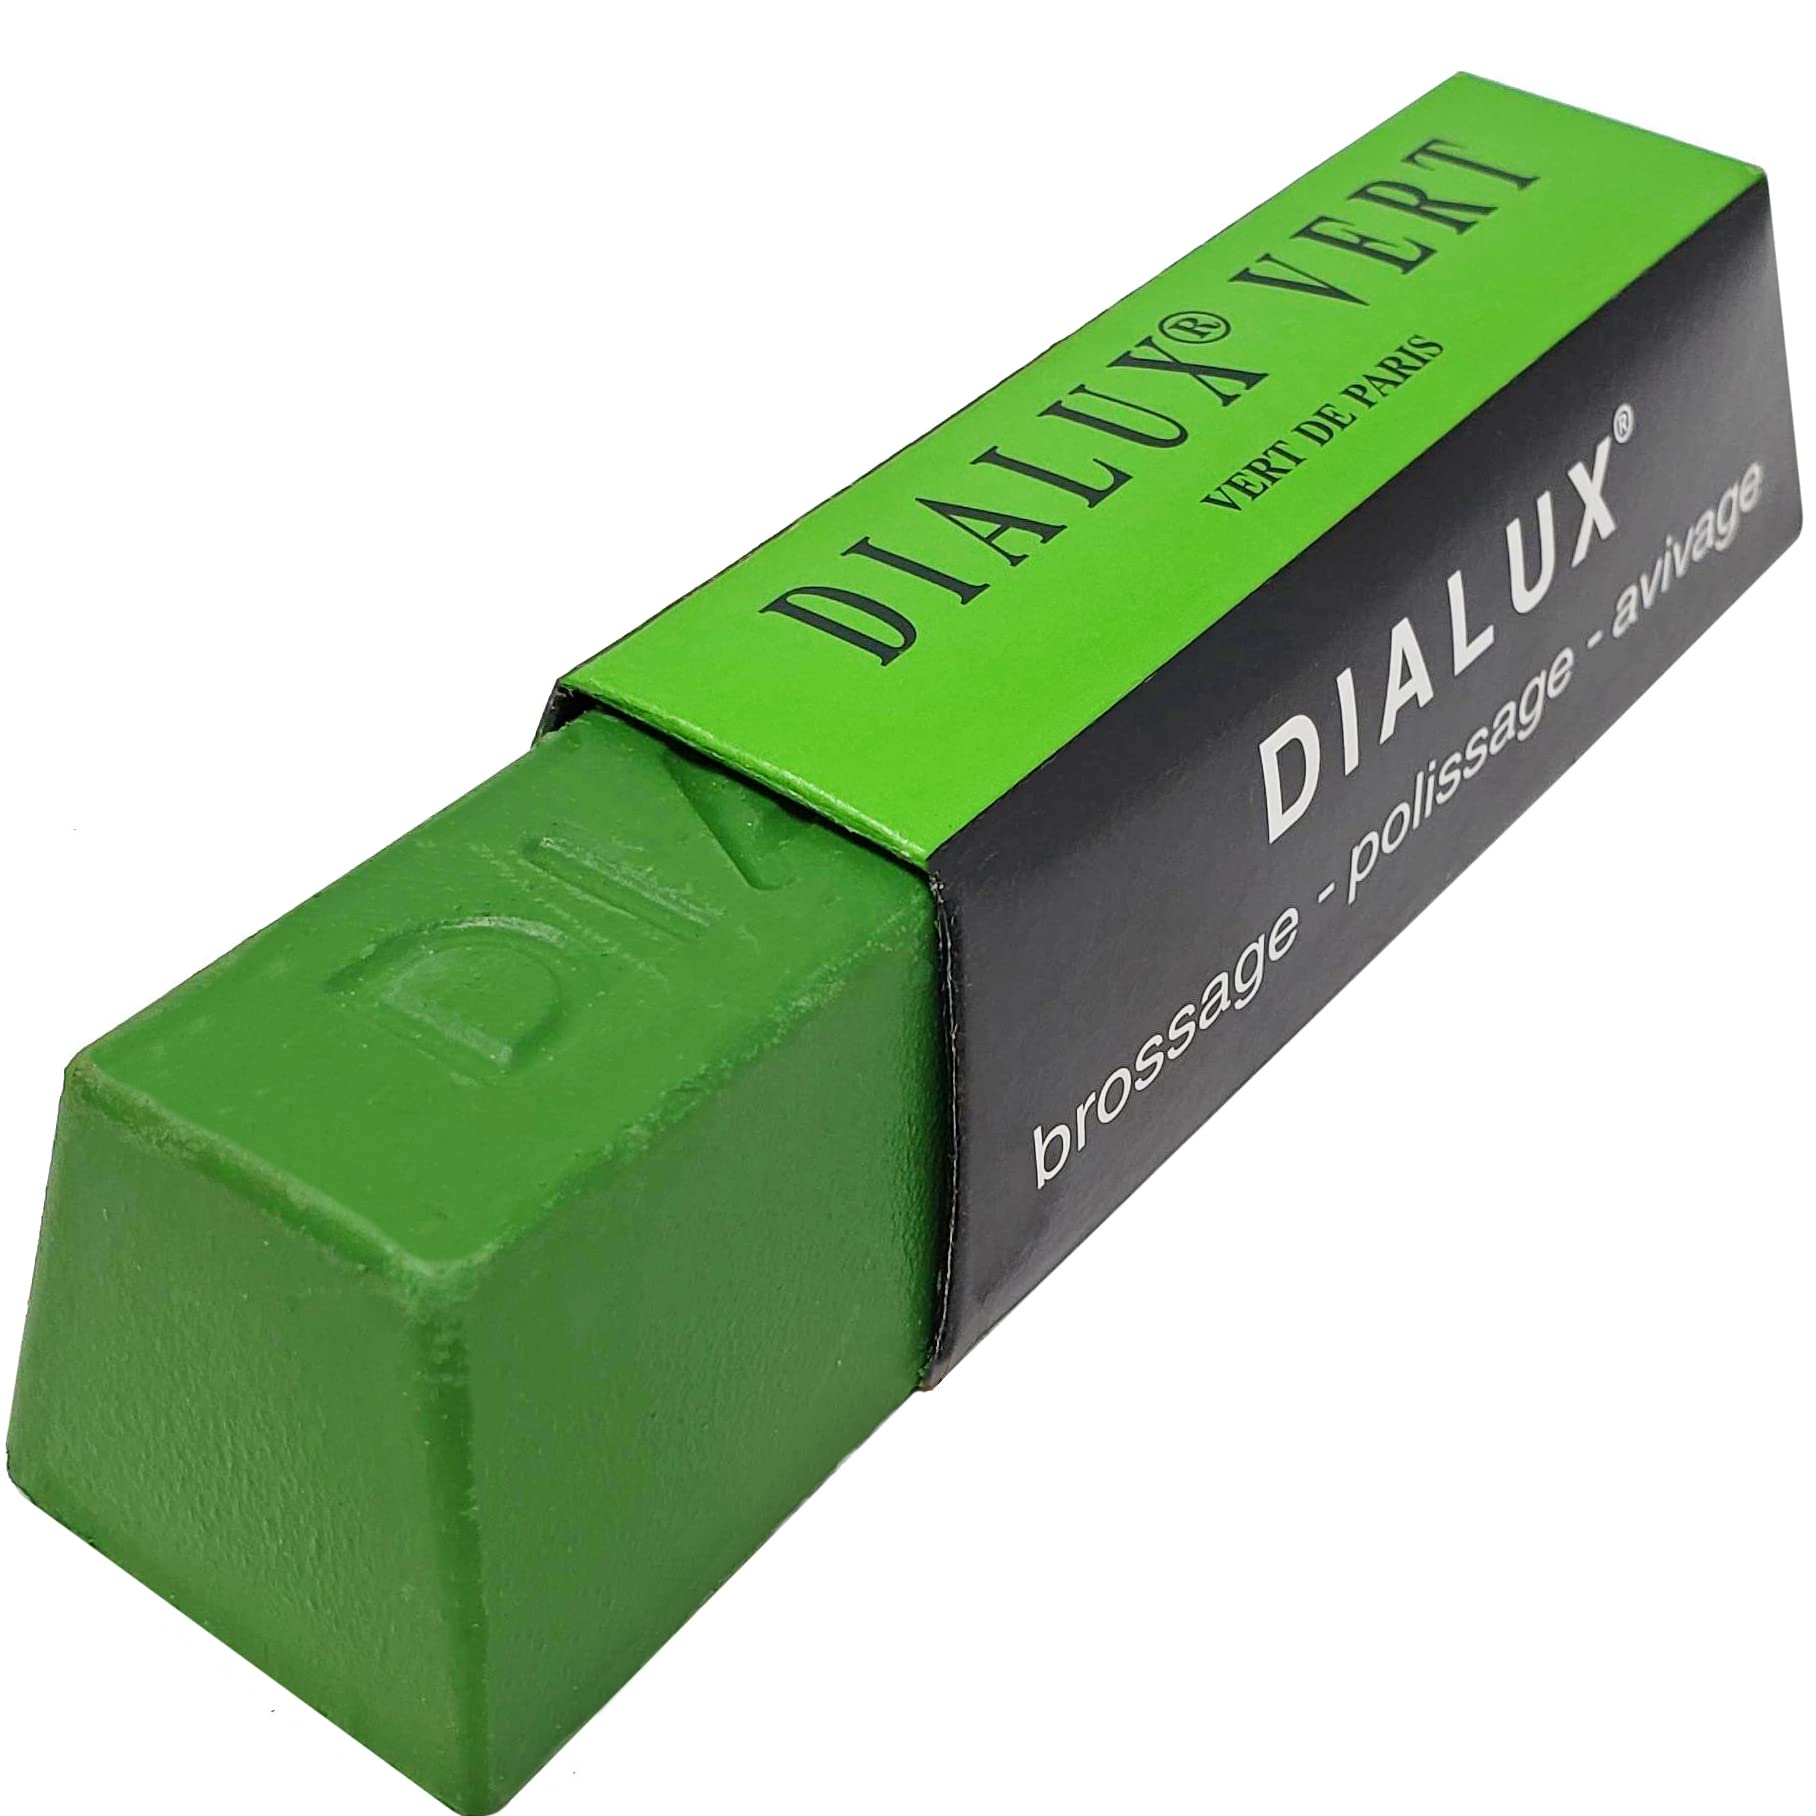 Silver Gold Jewelry Dialux Polishing Compound Yellow, Gray, Green